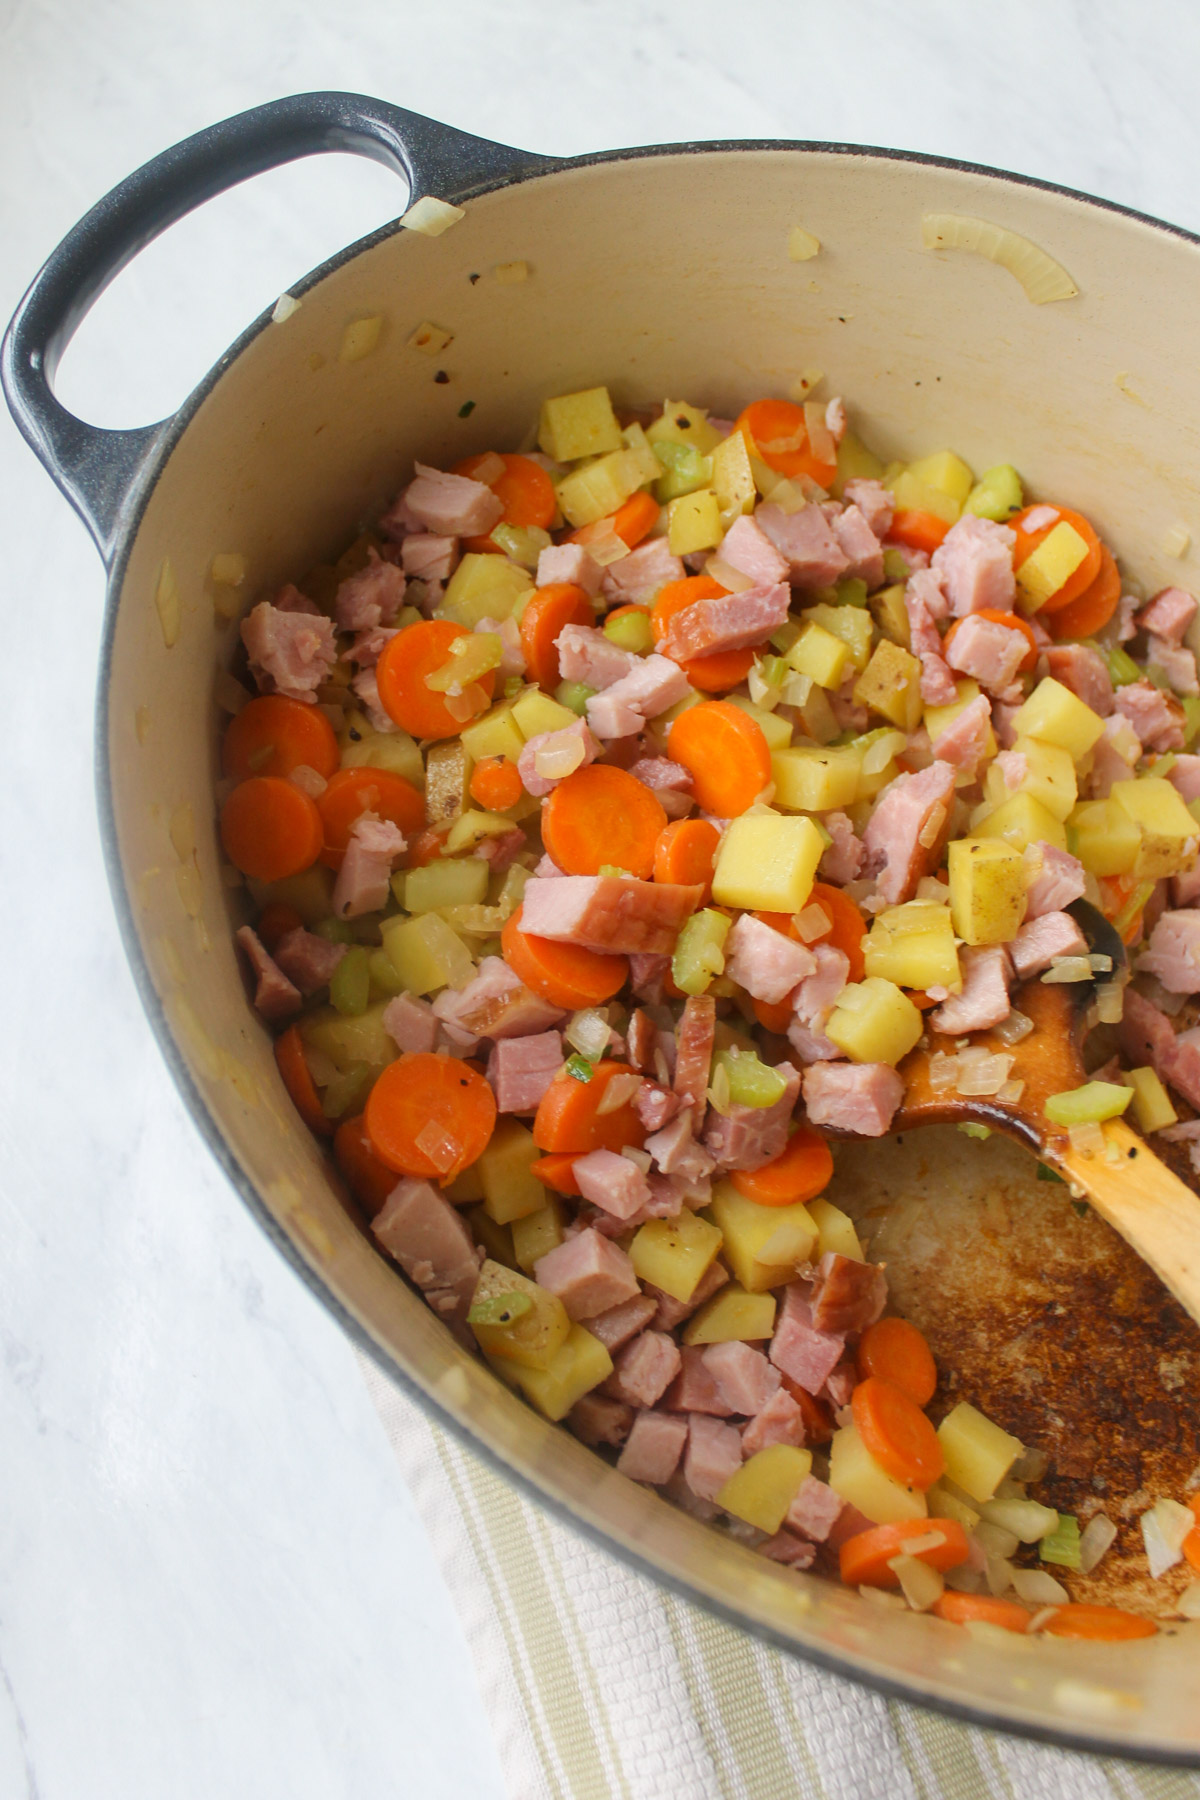 Diced ham added to a soup pot with onions, celery, carrots and potato.